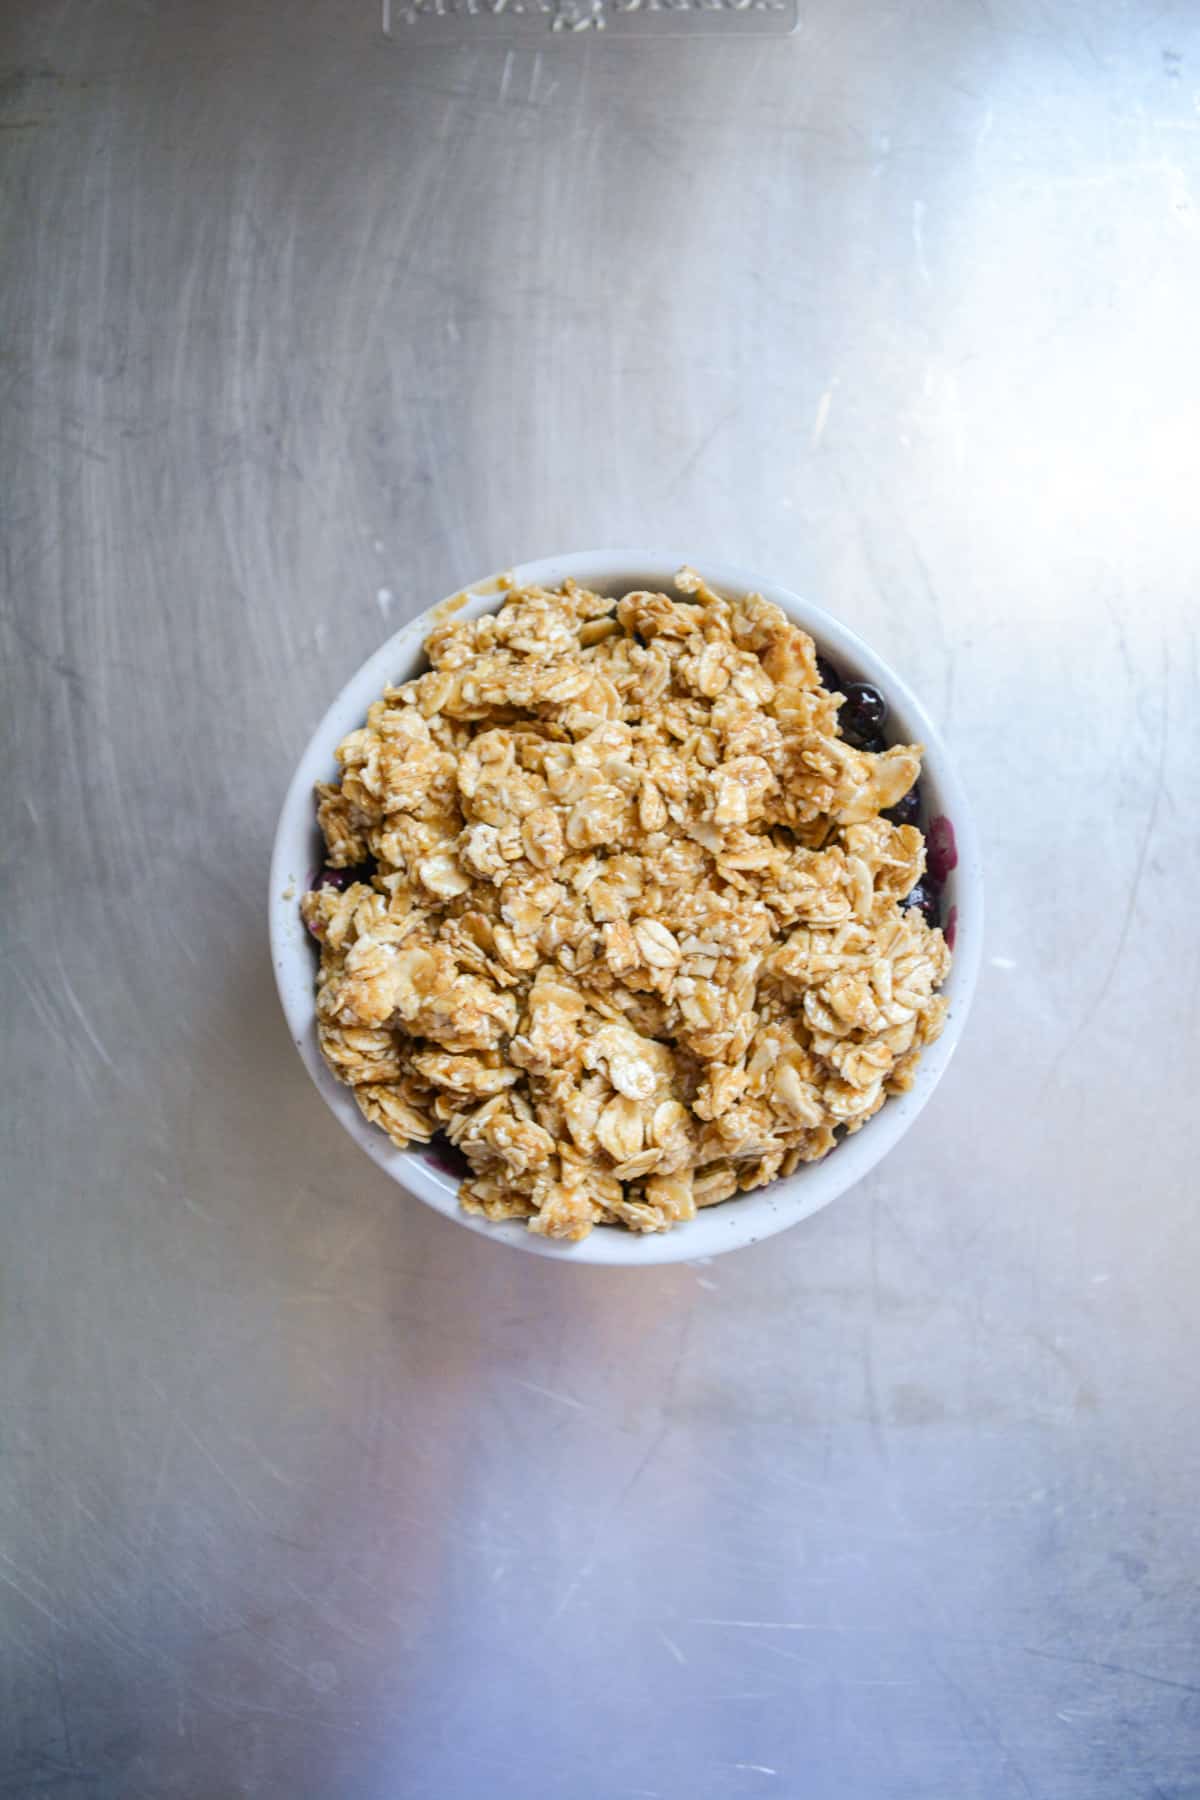 Singe Serving blueberry crisp topped with oat crumple and placed into a baking sheet.